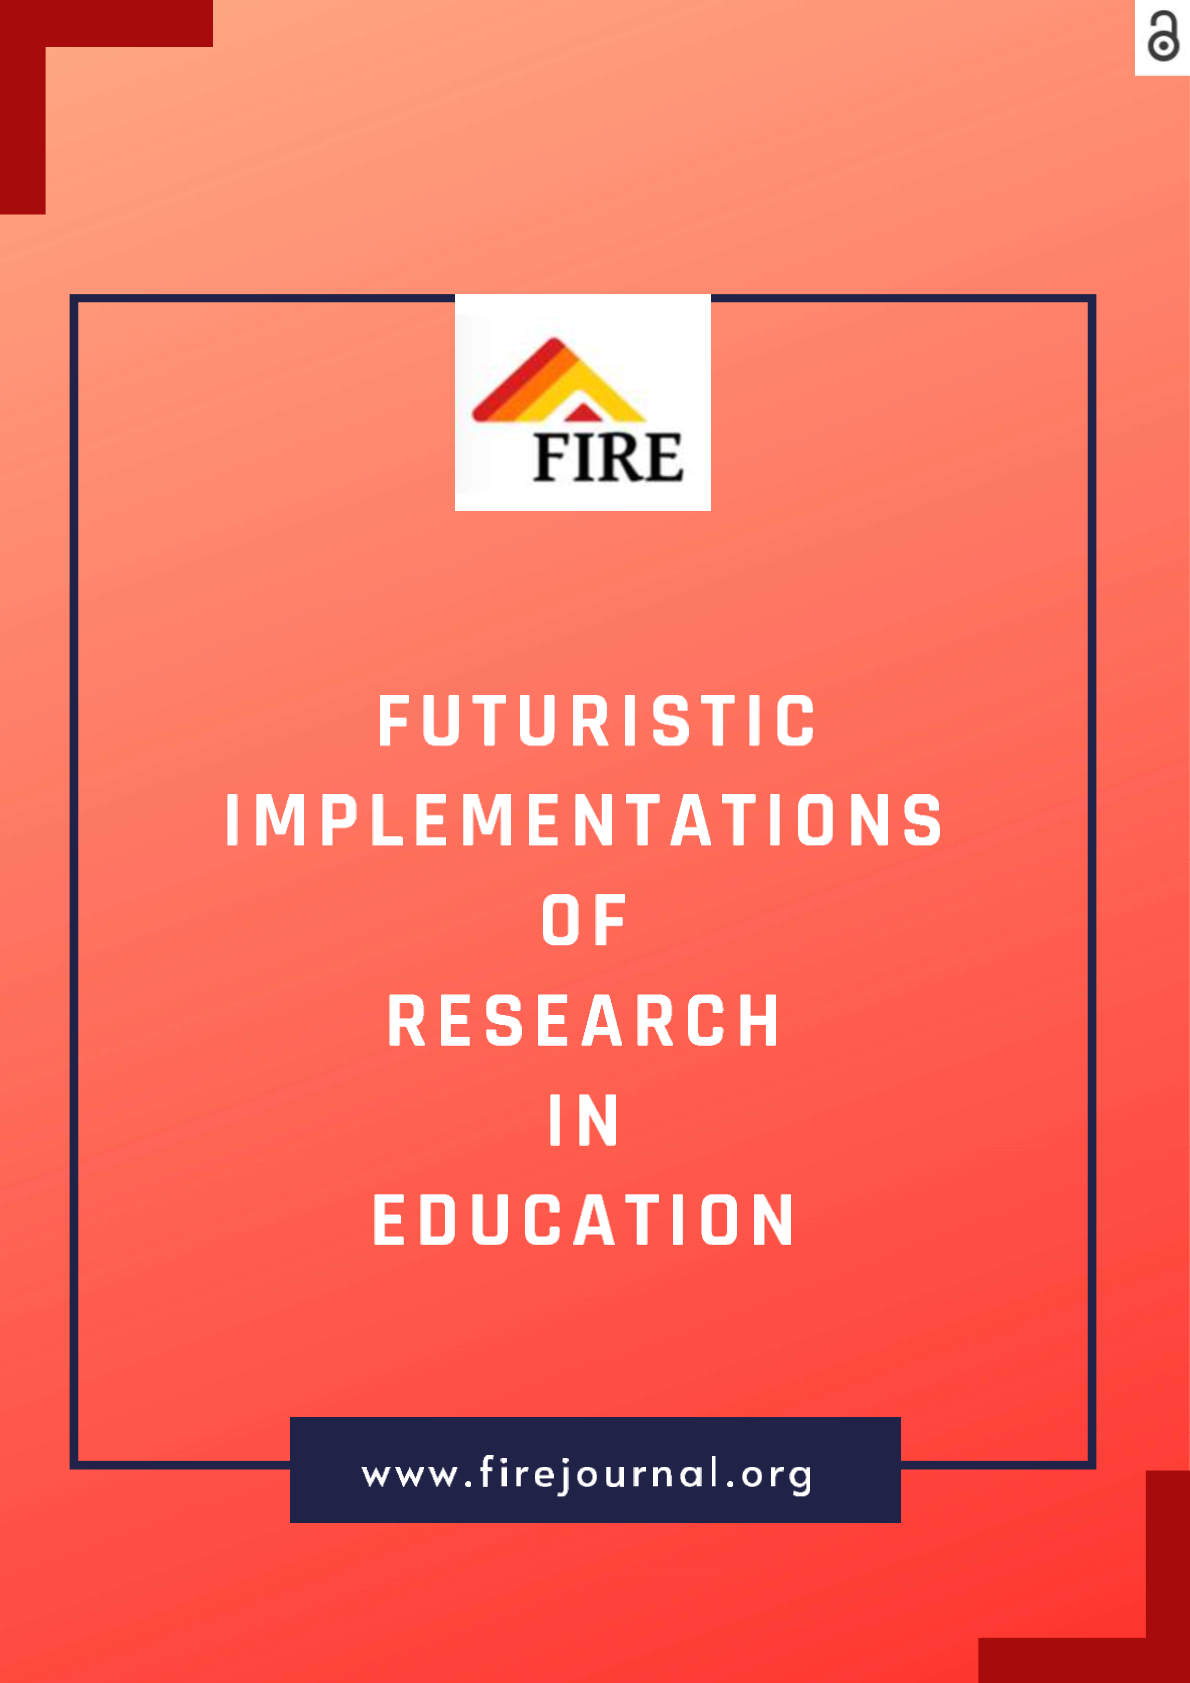 FIRE: Futuristic Implementations of Research in Education